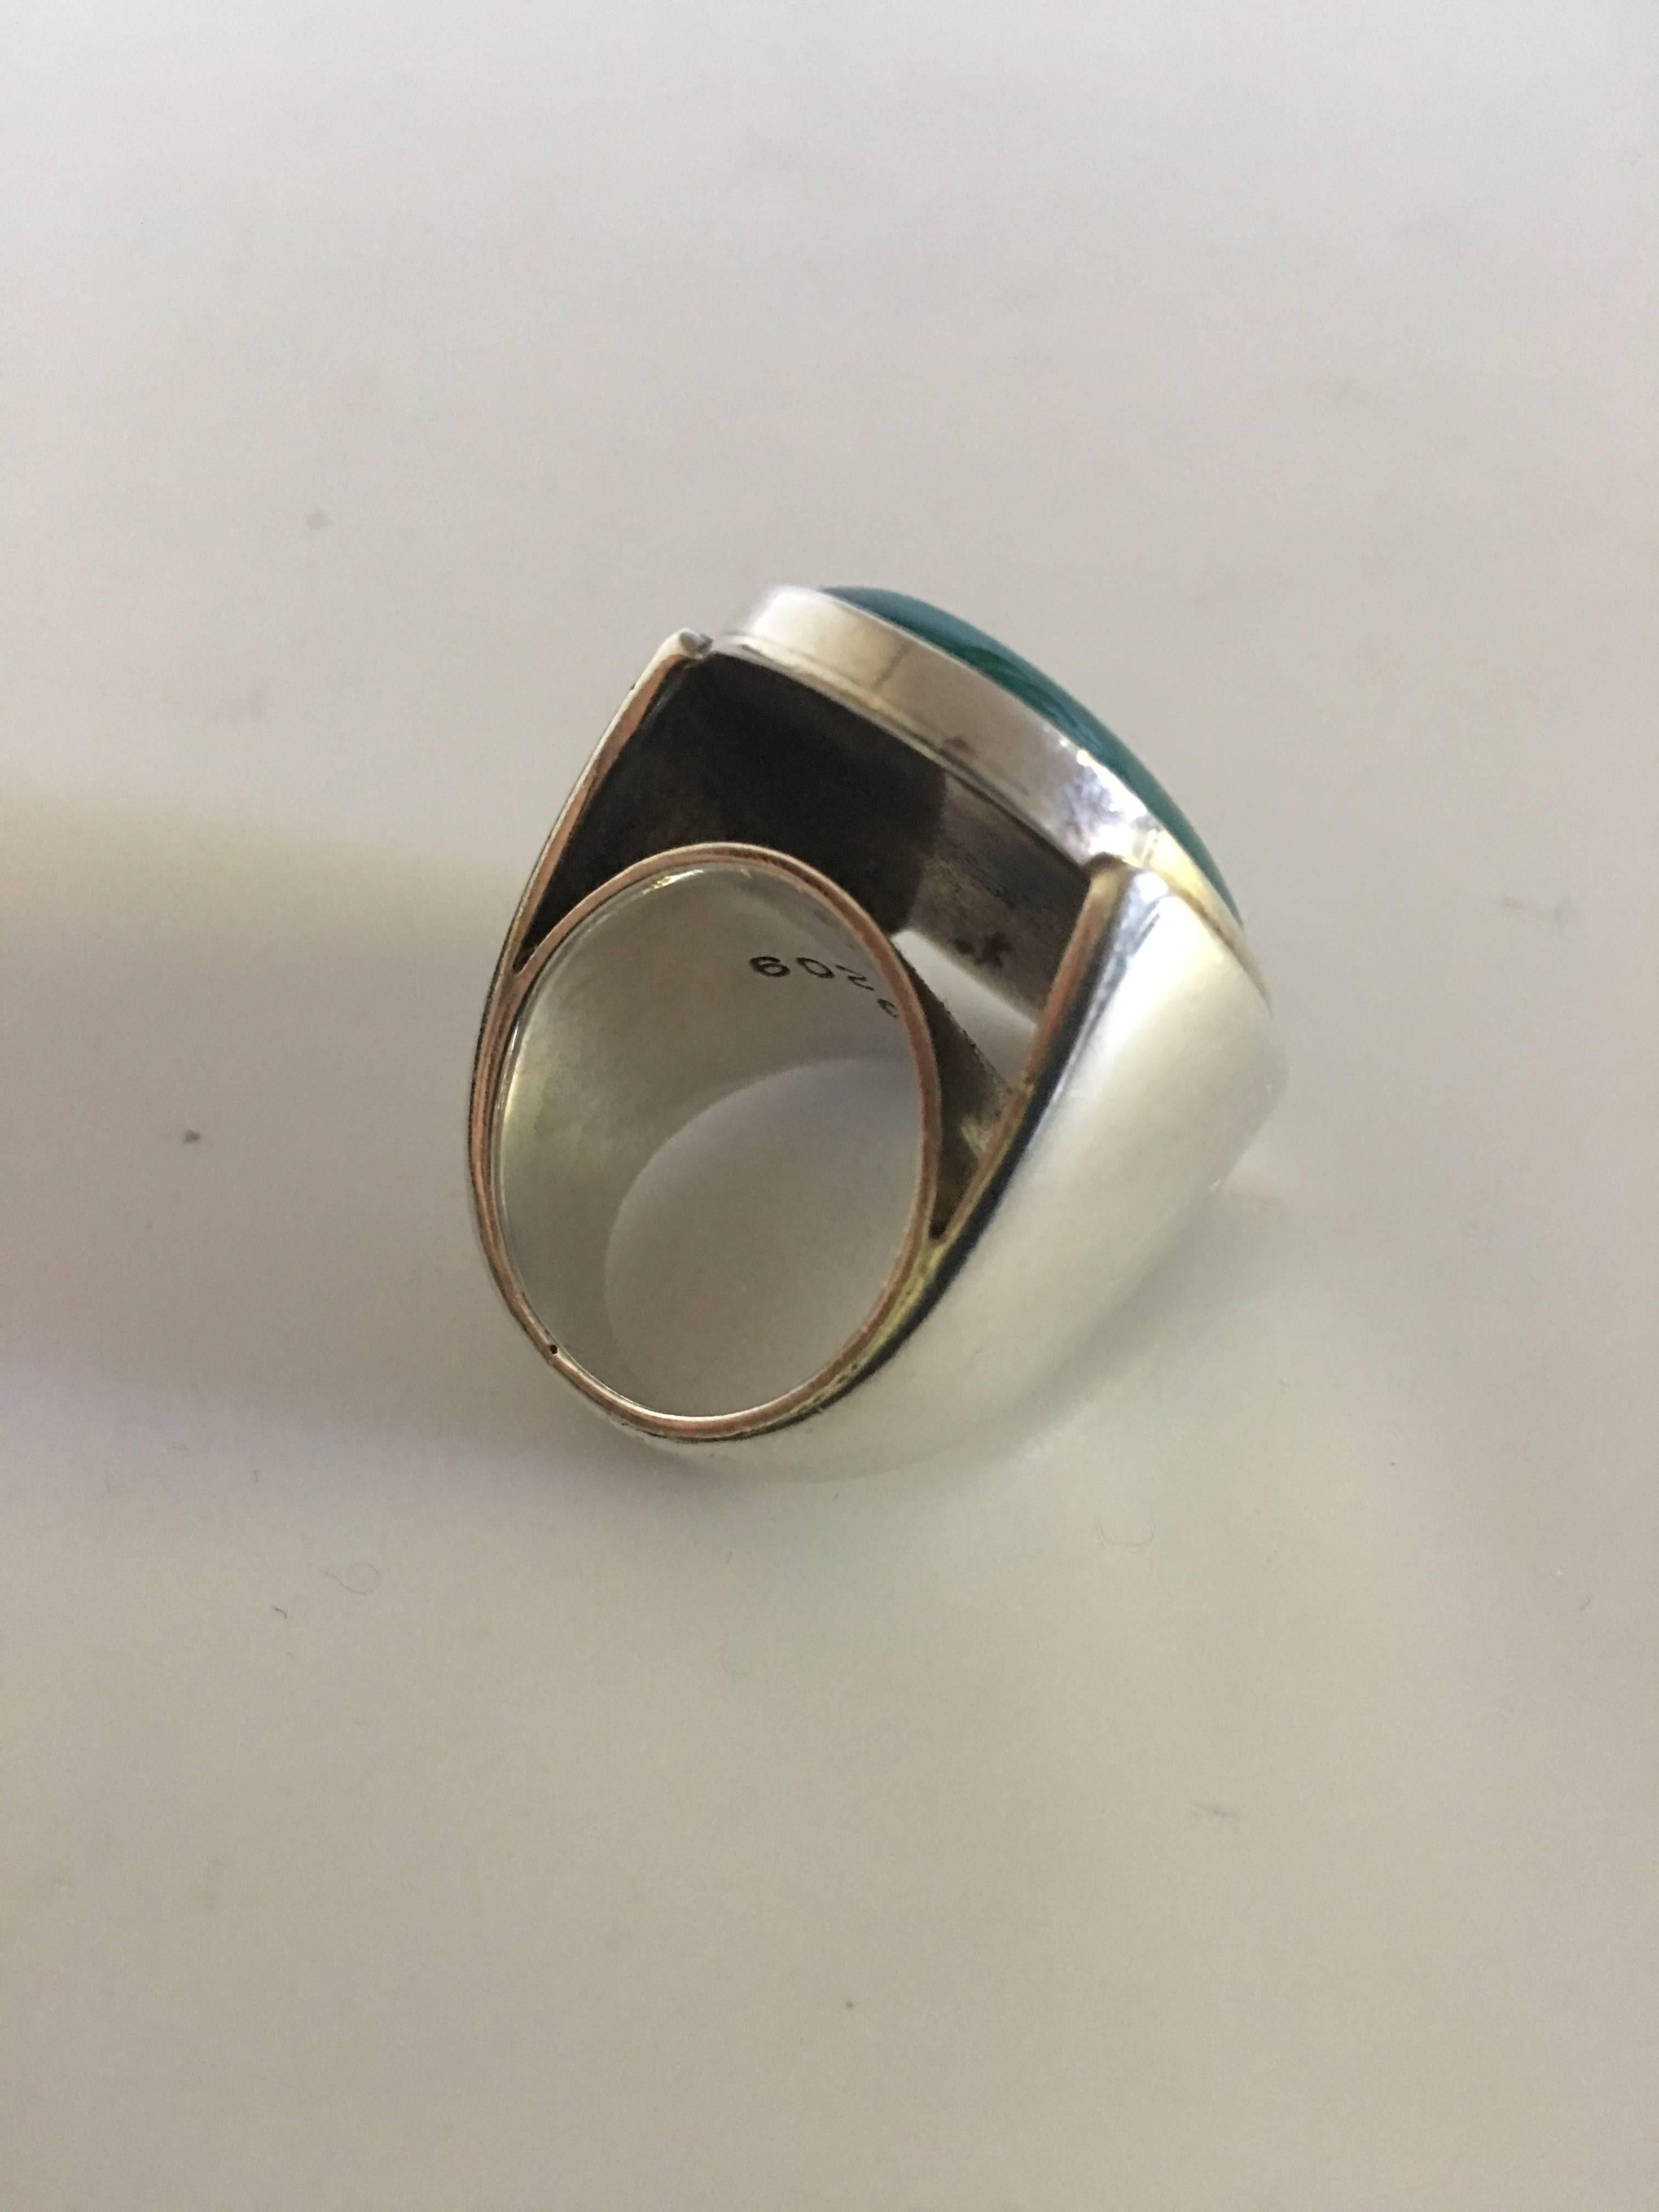 Modern Large Georg Jensen Sterling Silver Ring No. 209 with Green Agate